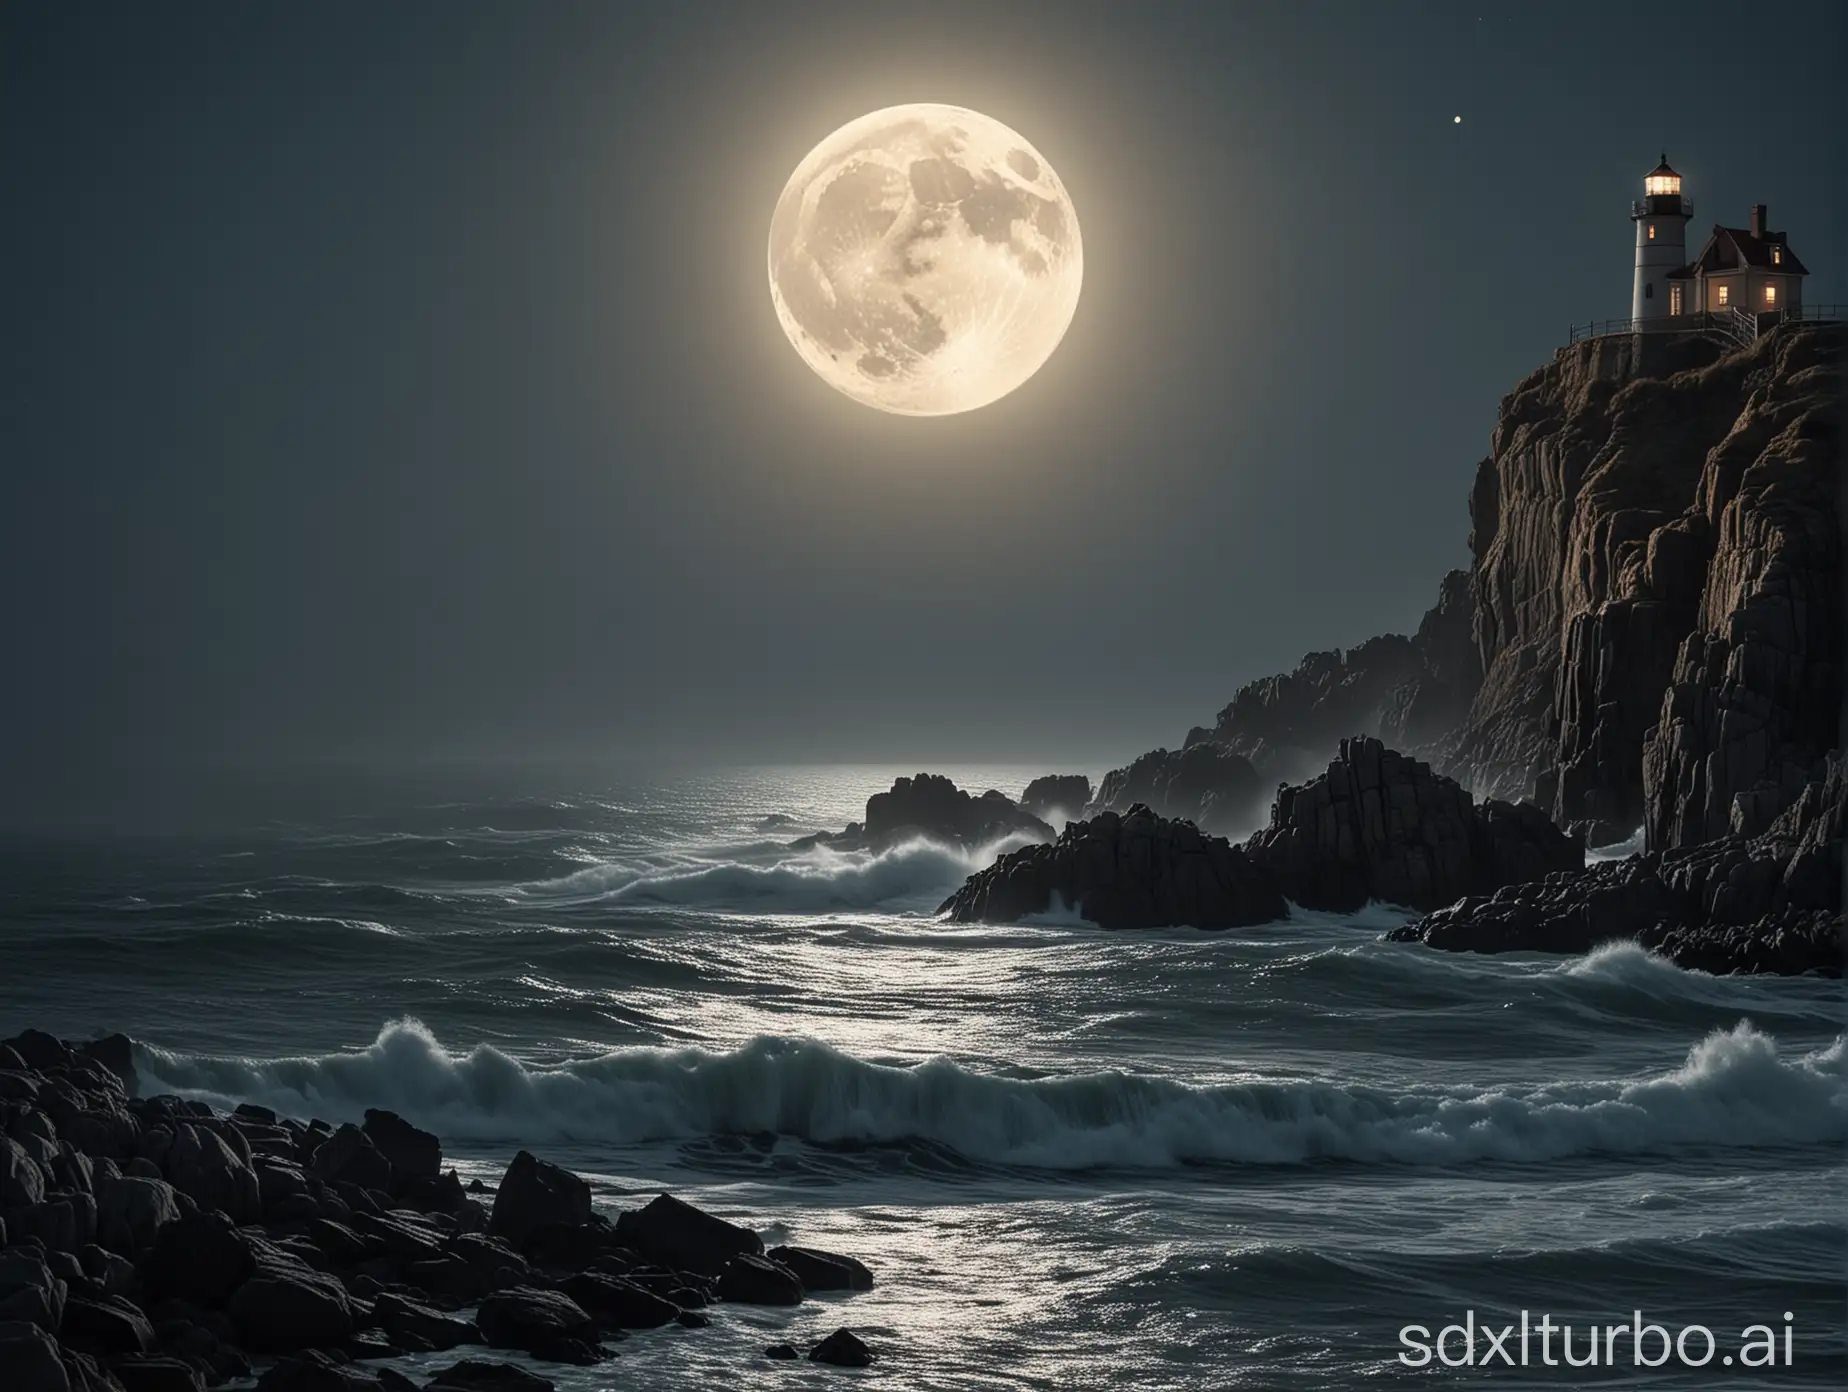 Lighthouse on a rocky outcrop with a full moon in the background and waves in the foreground, cinematic photography by Philip Chodas, neo-romanticism, matte painting, dramatic lighting, moonlit night, Canon EOS 5D Mark IV, 50mm, 4k